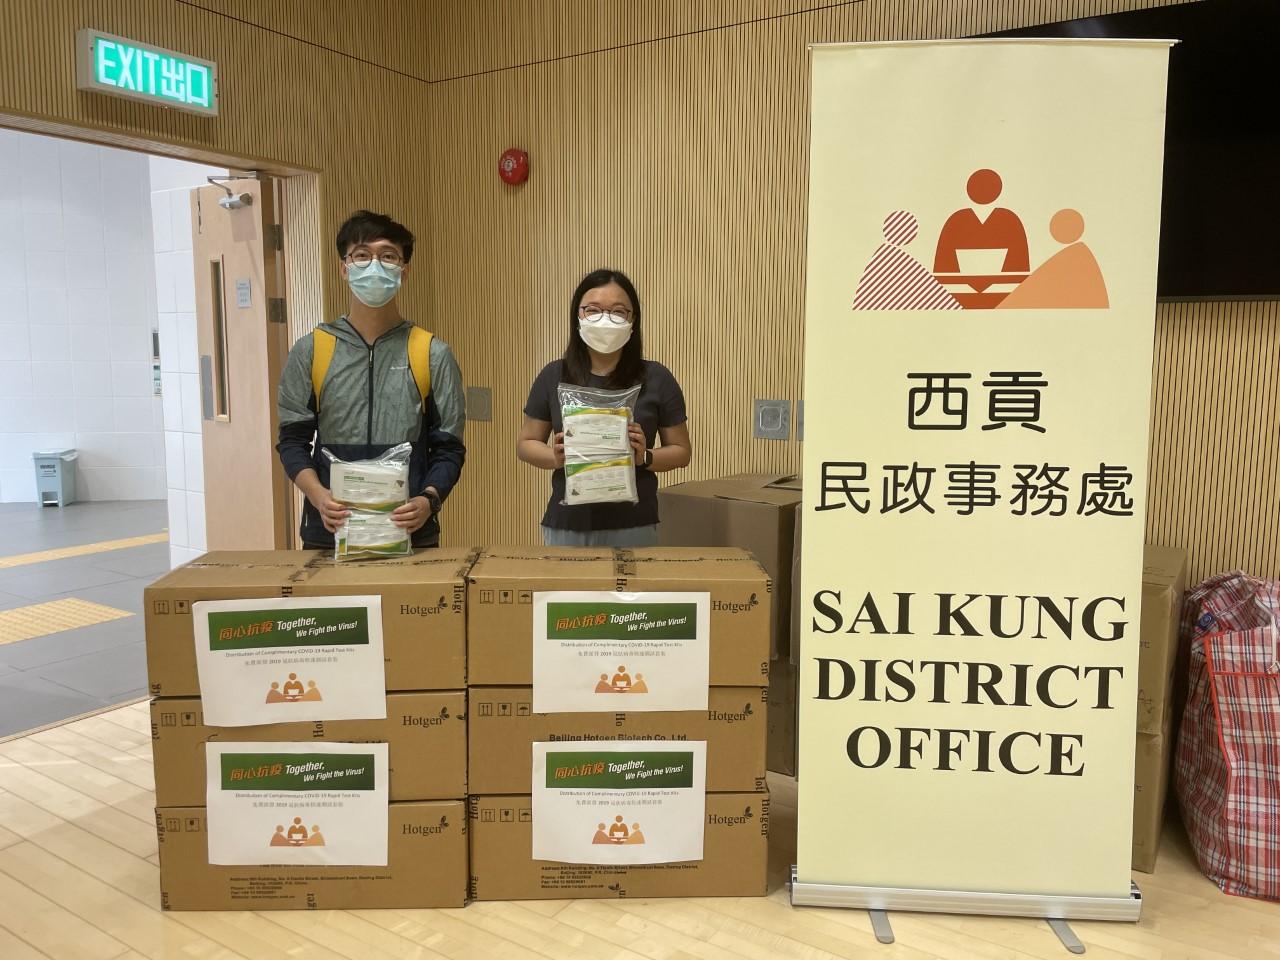 The Sai Kung District Office today (March 20) distributed COVID-19 rapid test kits to households, cleansing workers and property management staff living and working in Serenity Place for voluntary testing through the property management company.
